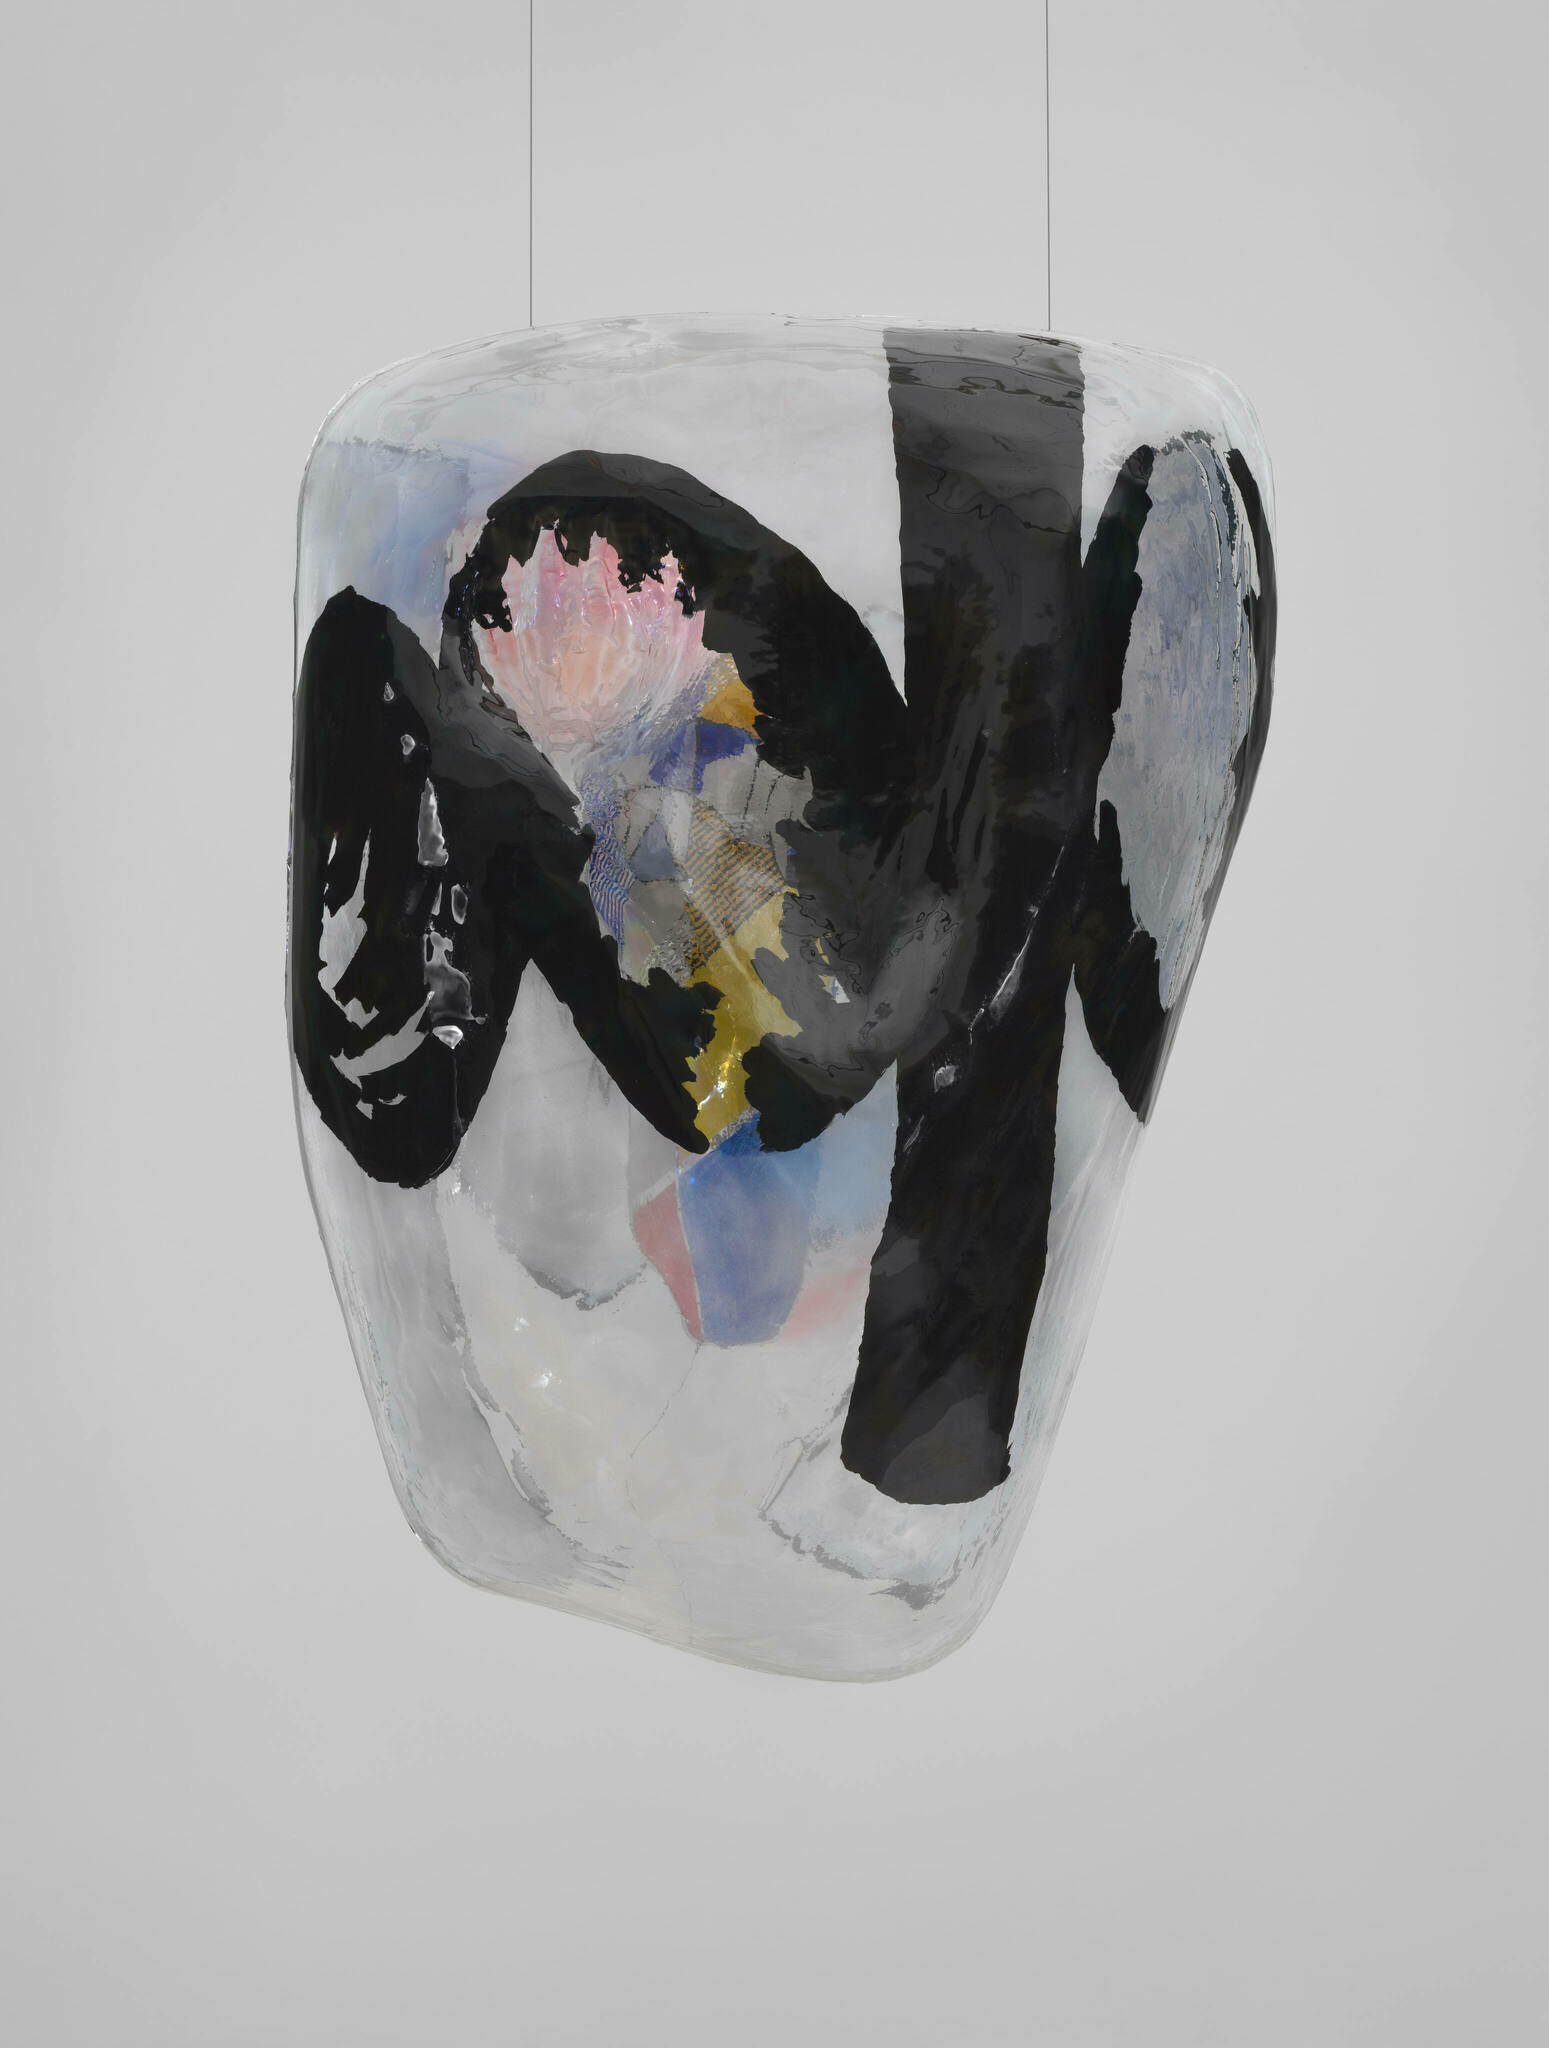 A hanging, transparent blob with bold swaths of black and patches of pale colors.